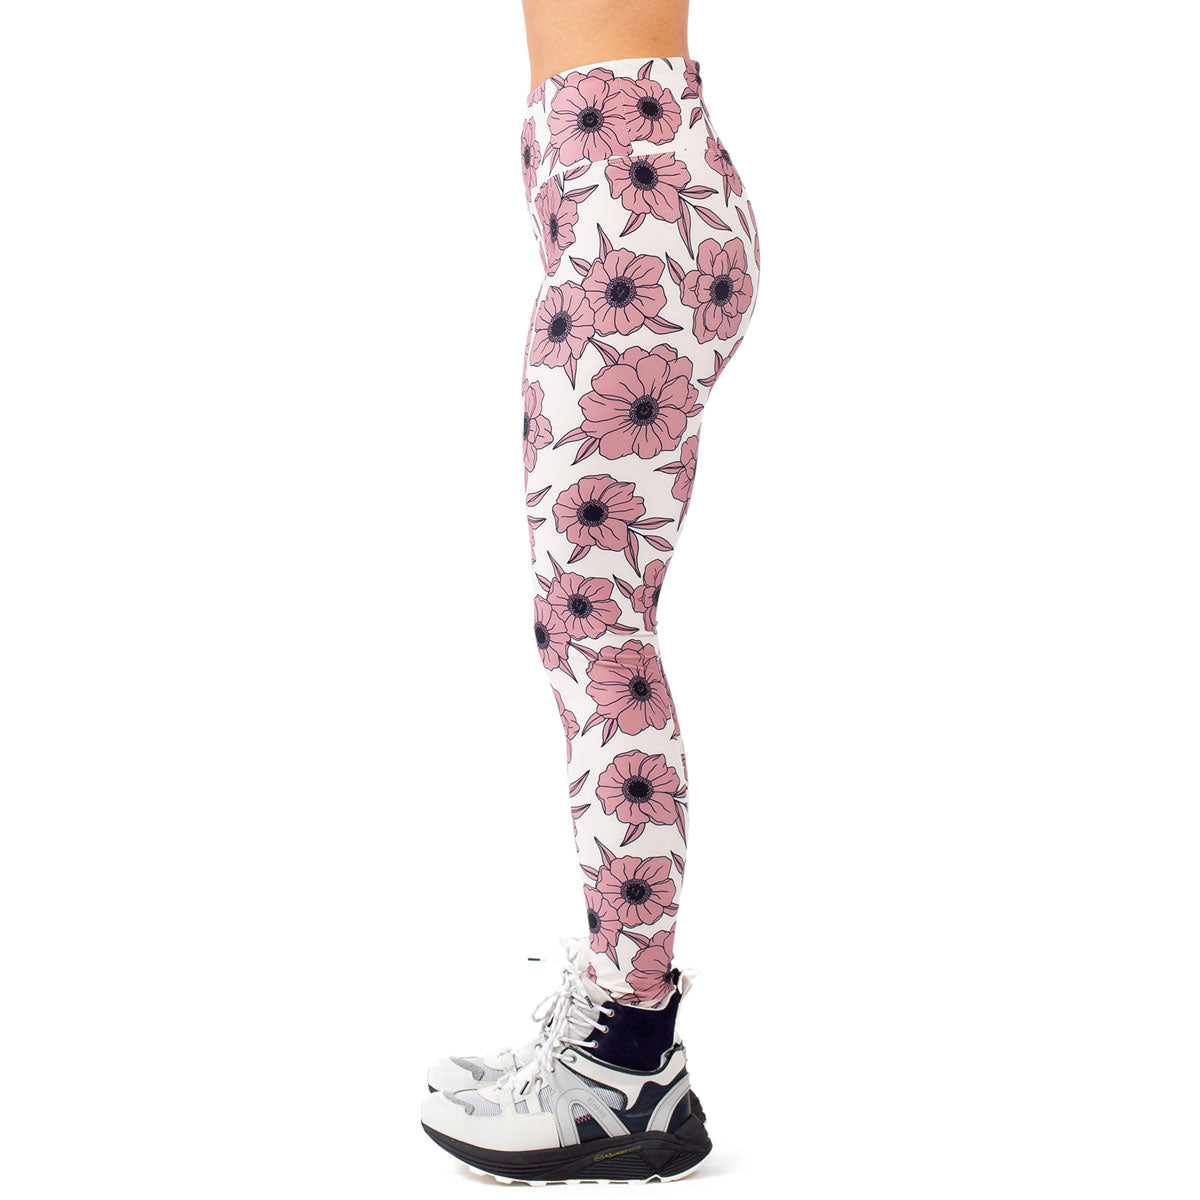 Eivy Icecold Tights Snowboard Base Layer - Wall Flowers image 4